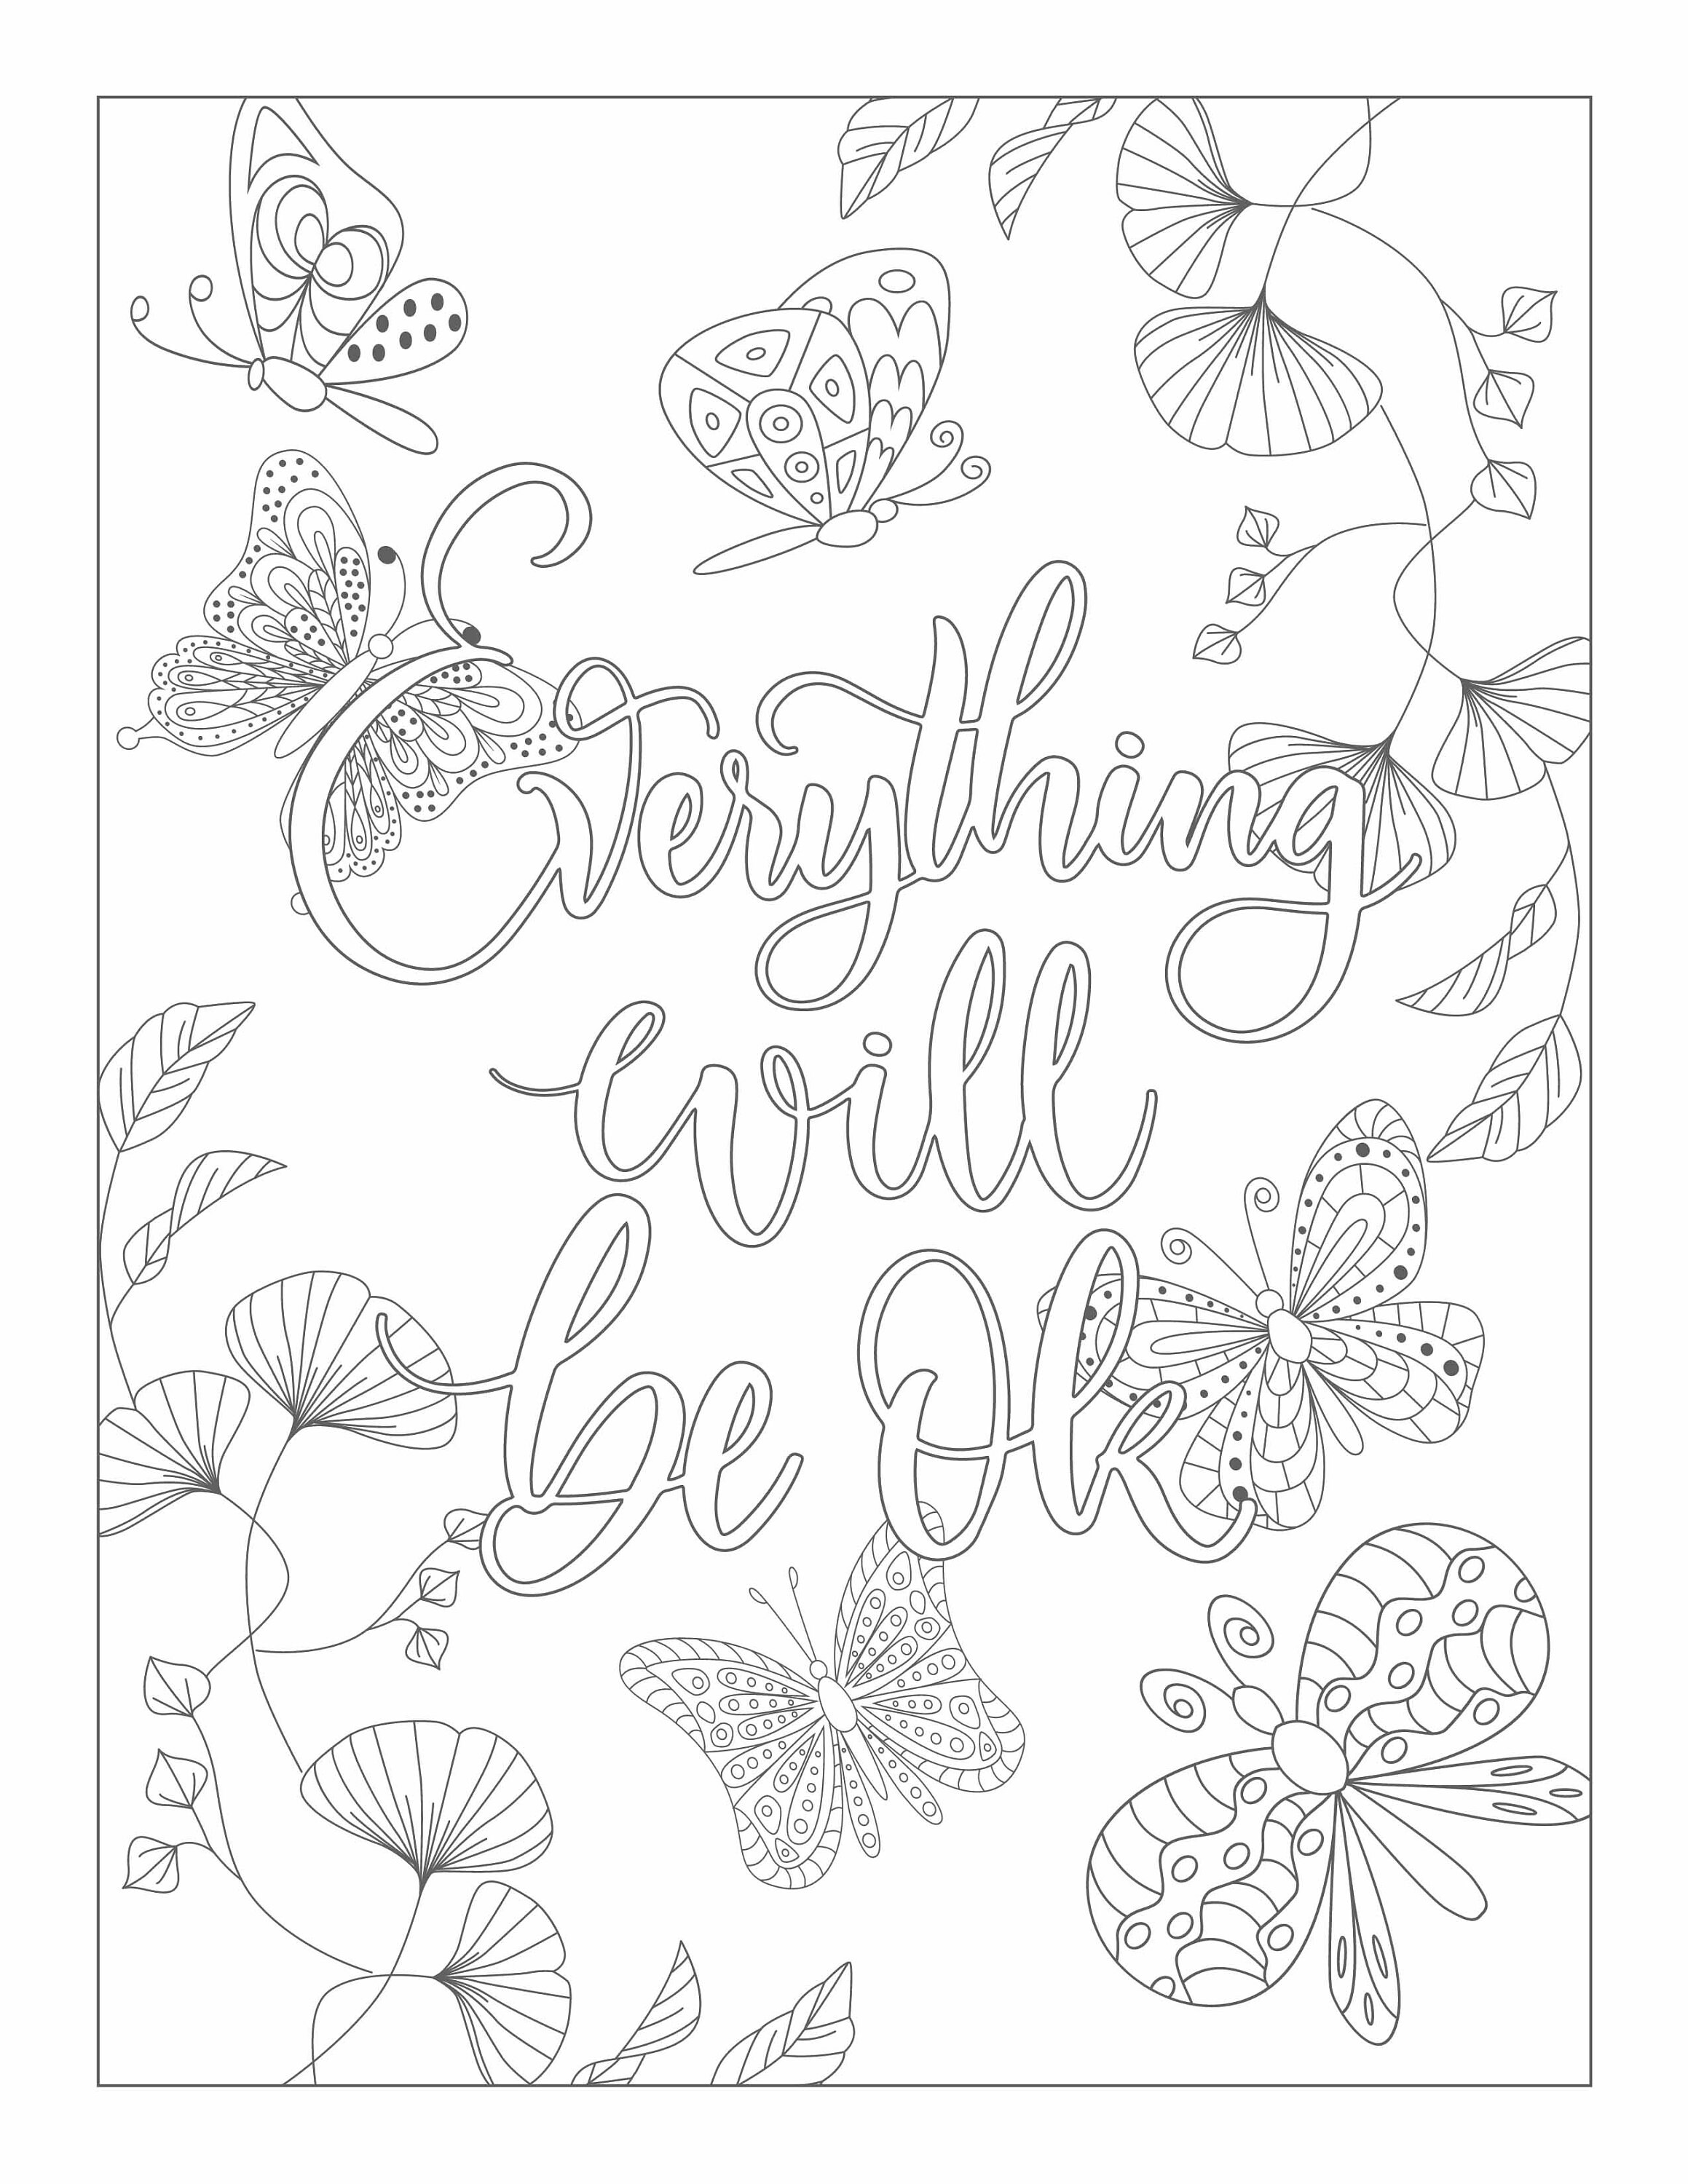 Adult Coloring Books and Positive Affirmation for Anxiety and Depression  for Women: Motivational Inspirational Quotes and Coloring Book To Boost  Your Mood and Confidence For Women, Teens & Adults by Pongyoh Art